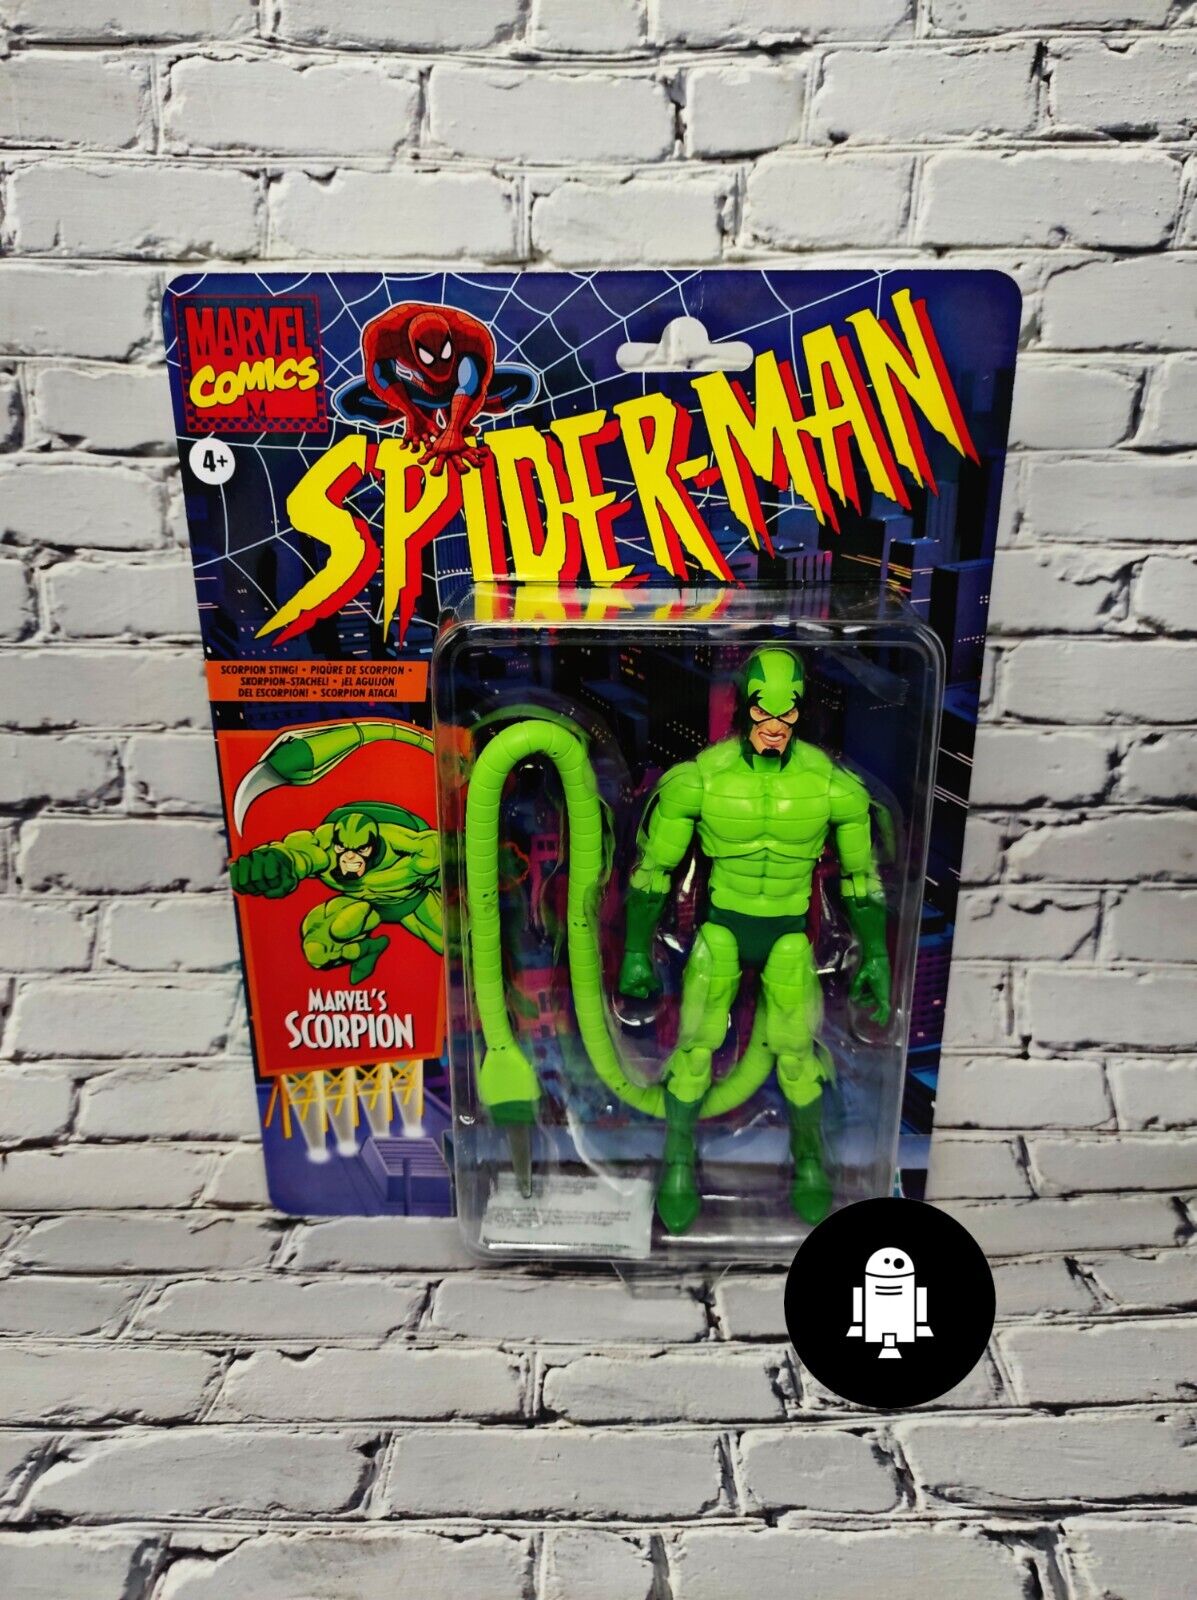 Marvel Legends Scorpion Retro Collection Spiderman In Stock / Ready to ship